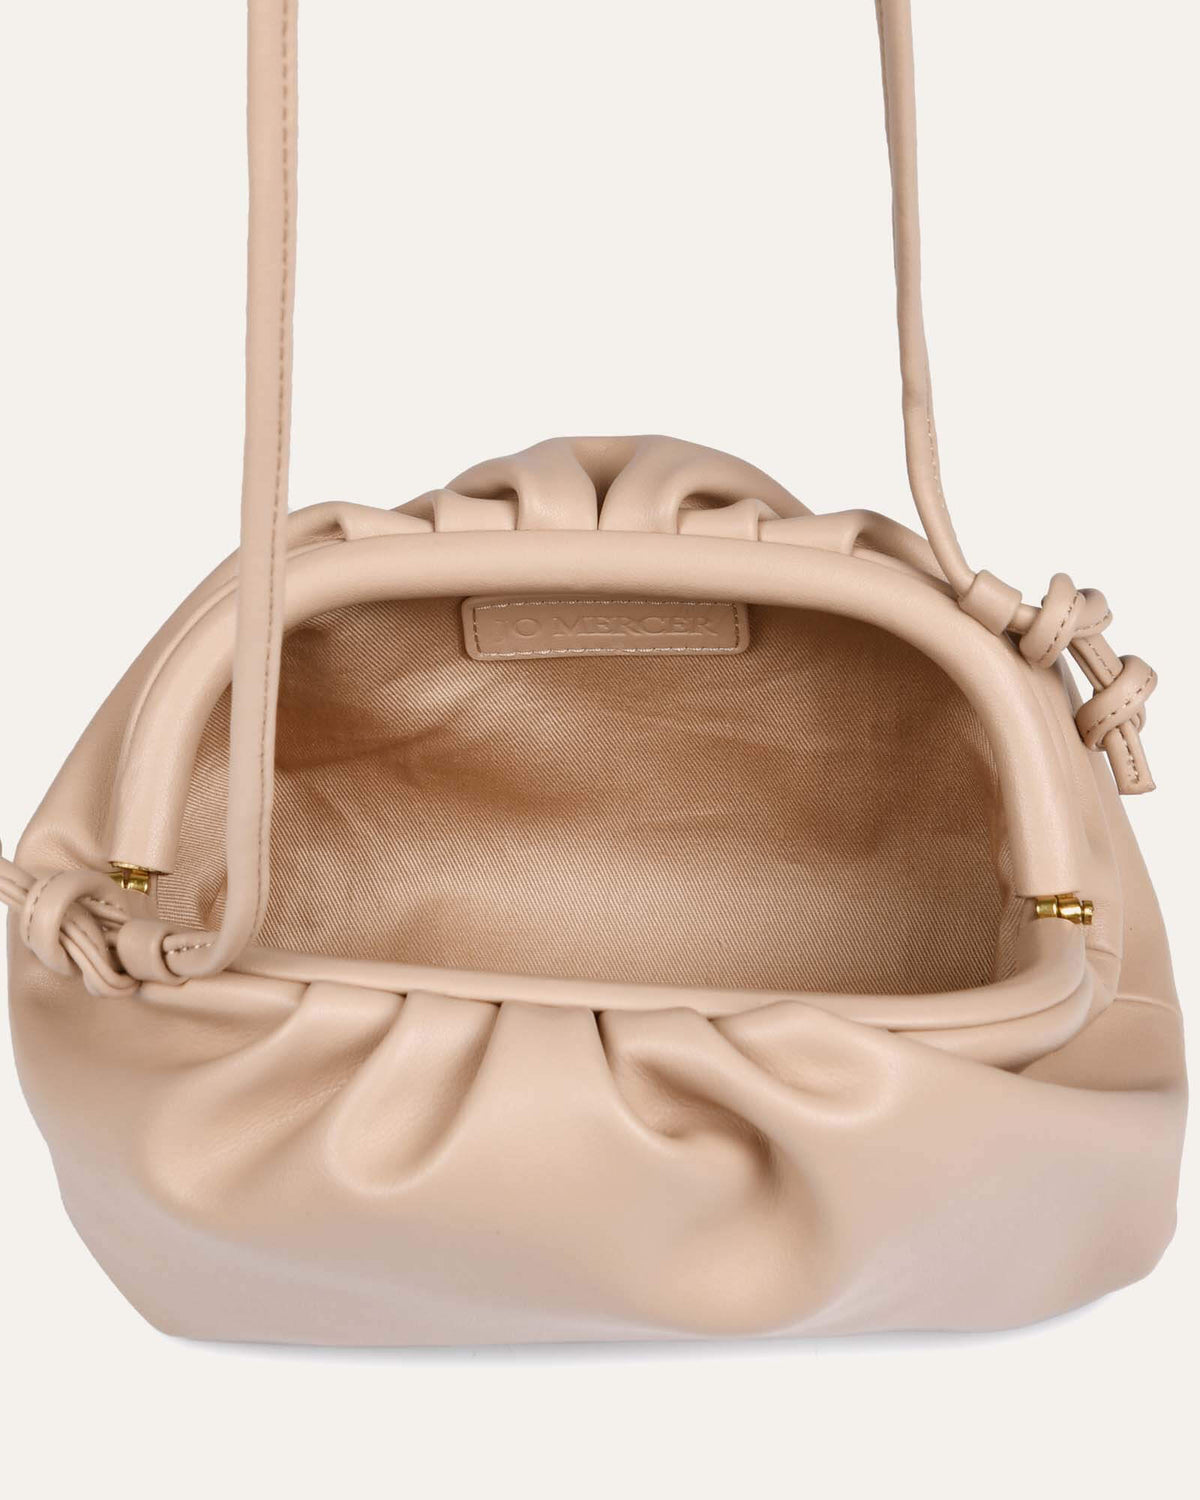 BAMBIE CROSS BODY BAG BEIGE LEATHER